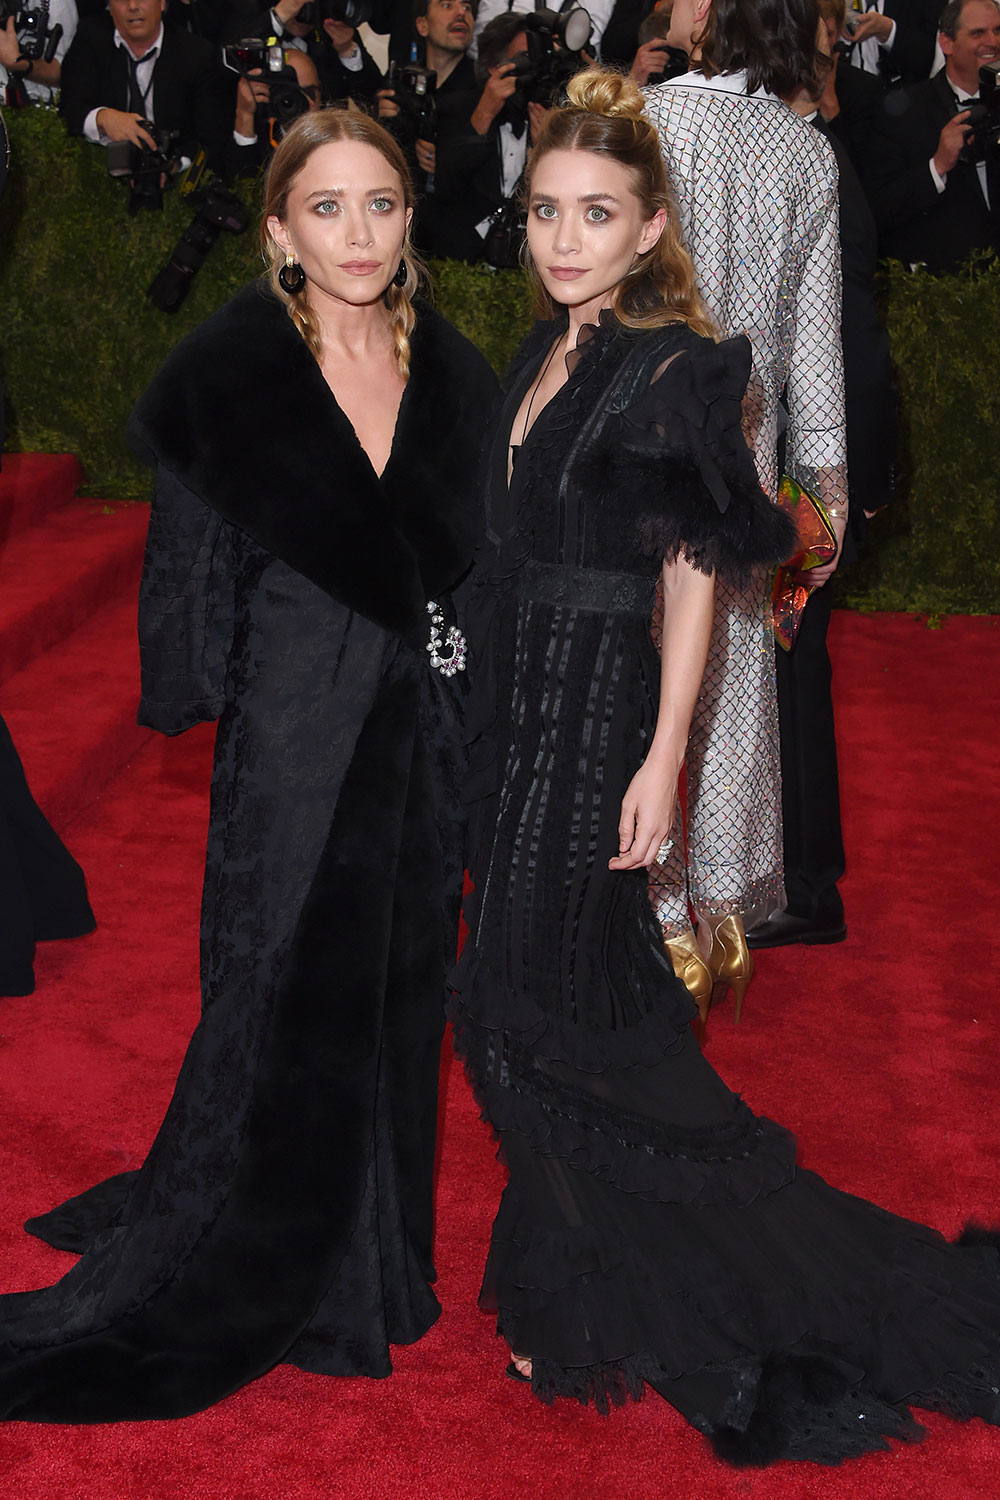 Mary-Kate and Ashley Olsen at the 2015 Metropolitan Museum of Art Costume Institute Gala